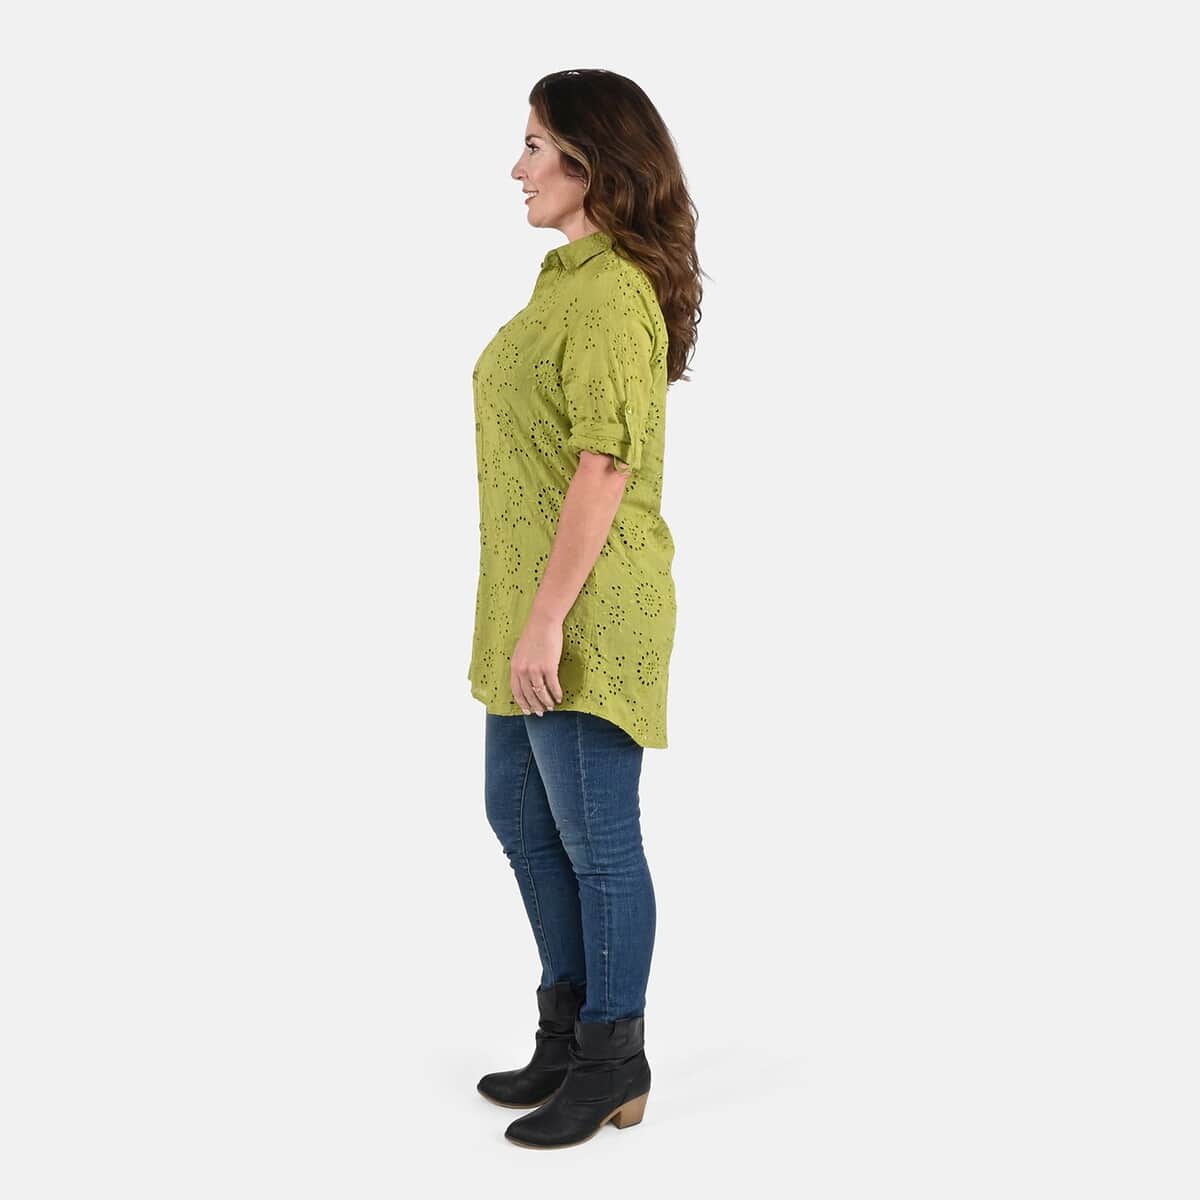 Tamsy Green Erin Eyelet Tunic - 1X image number 2